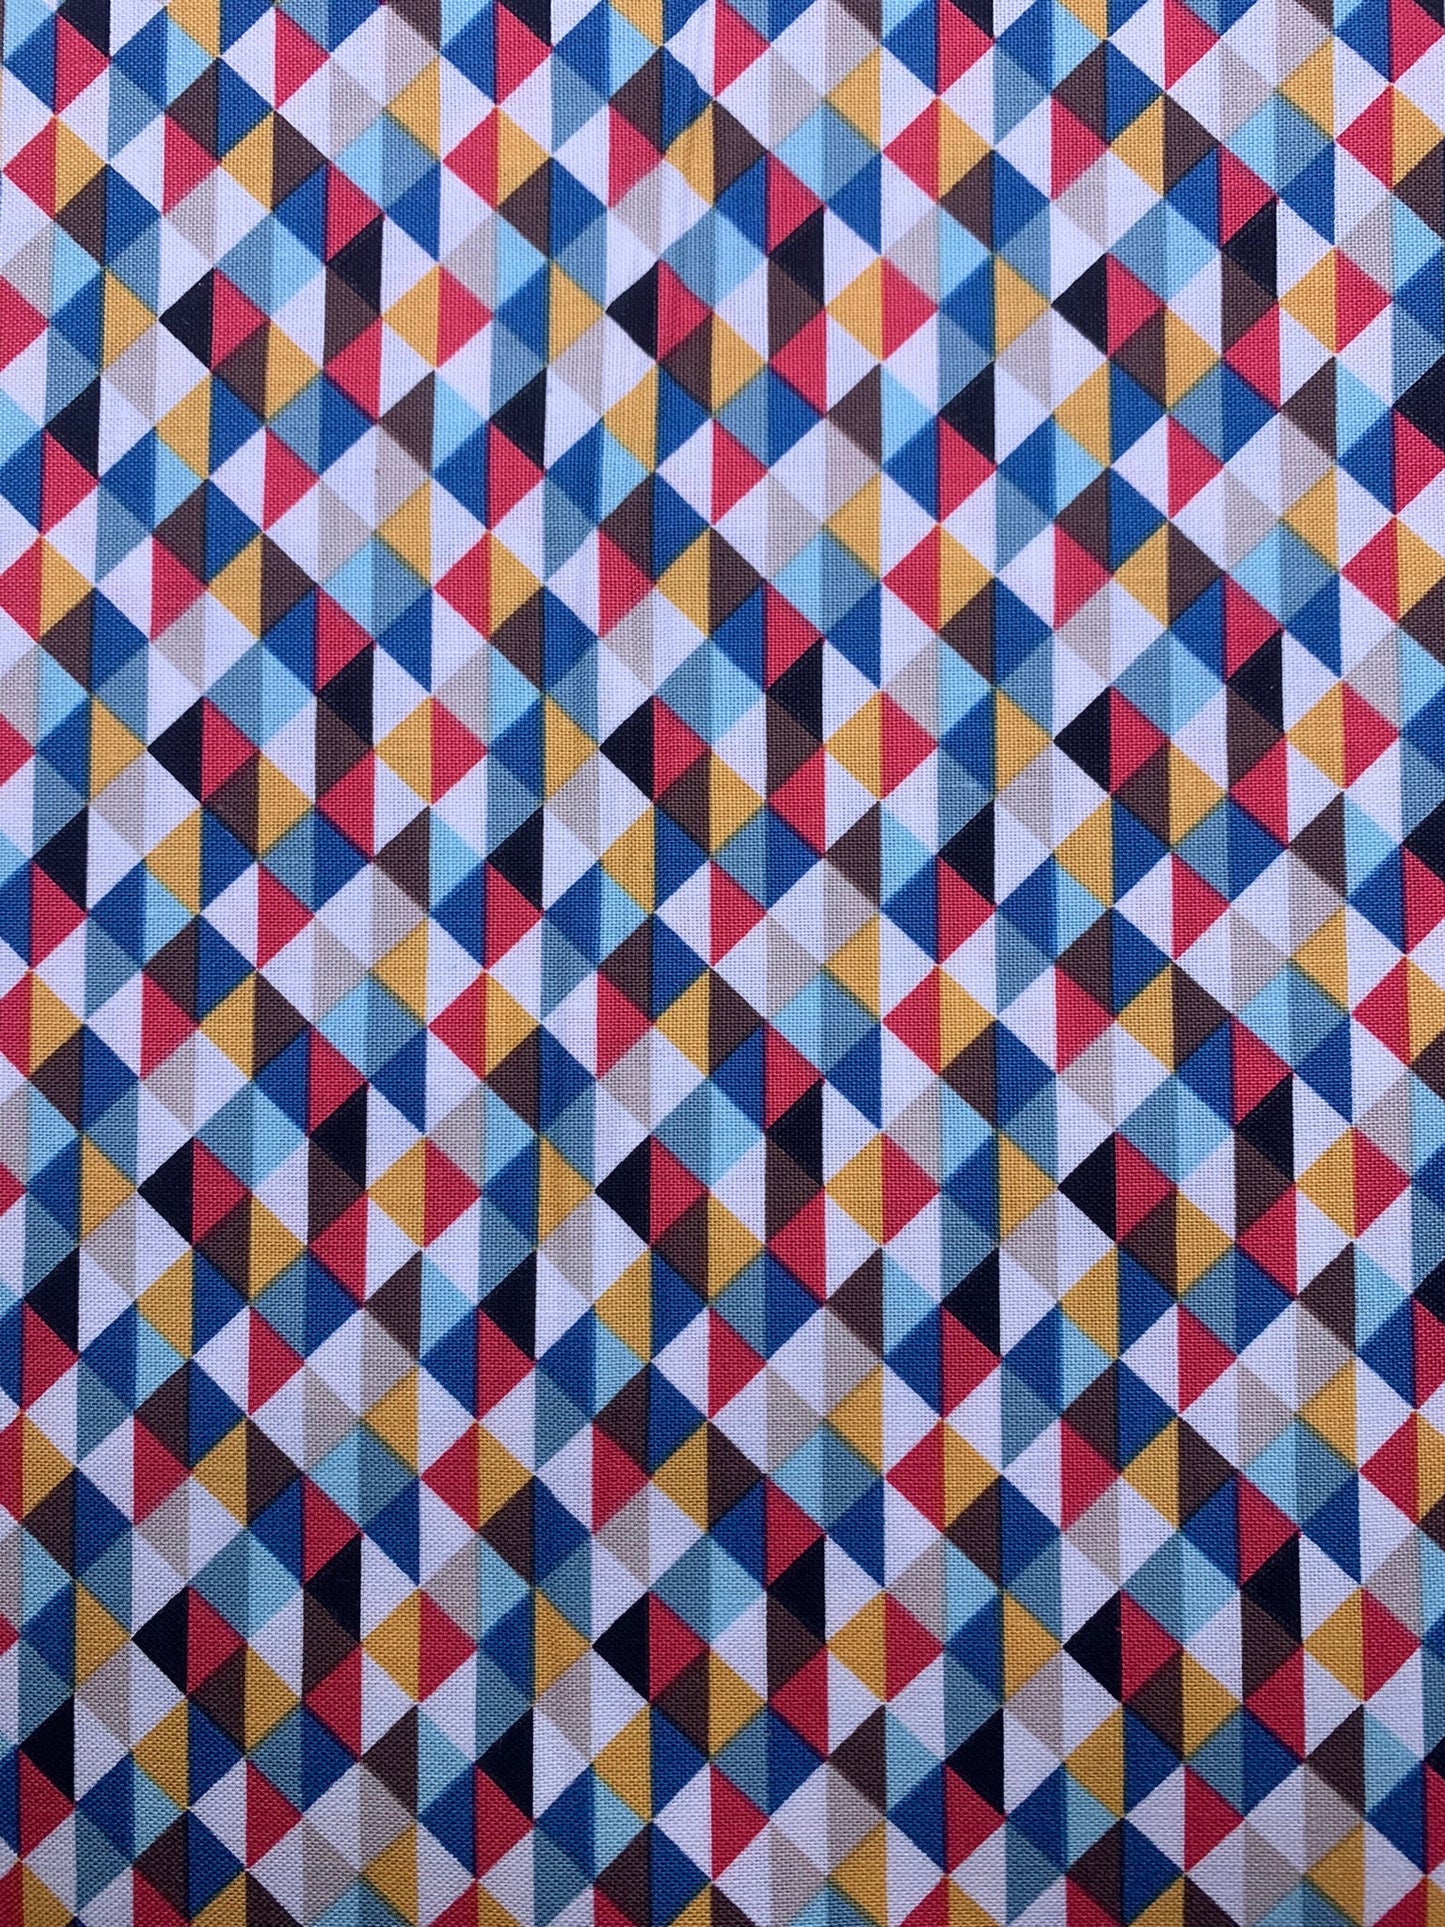 High Quality Quilting Fabric-- Hand Cut -Sold by the 1/2 Yard- Michael Miller Fabrics-Time Warp collection-100% Cotton Fabric. Color: Navy